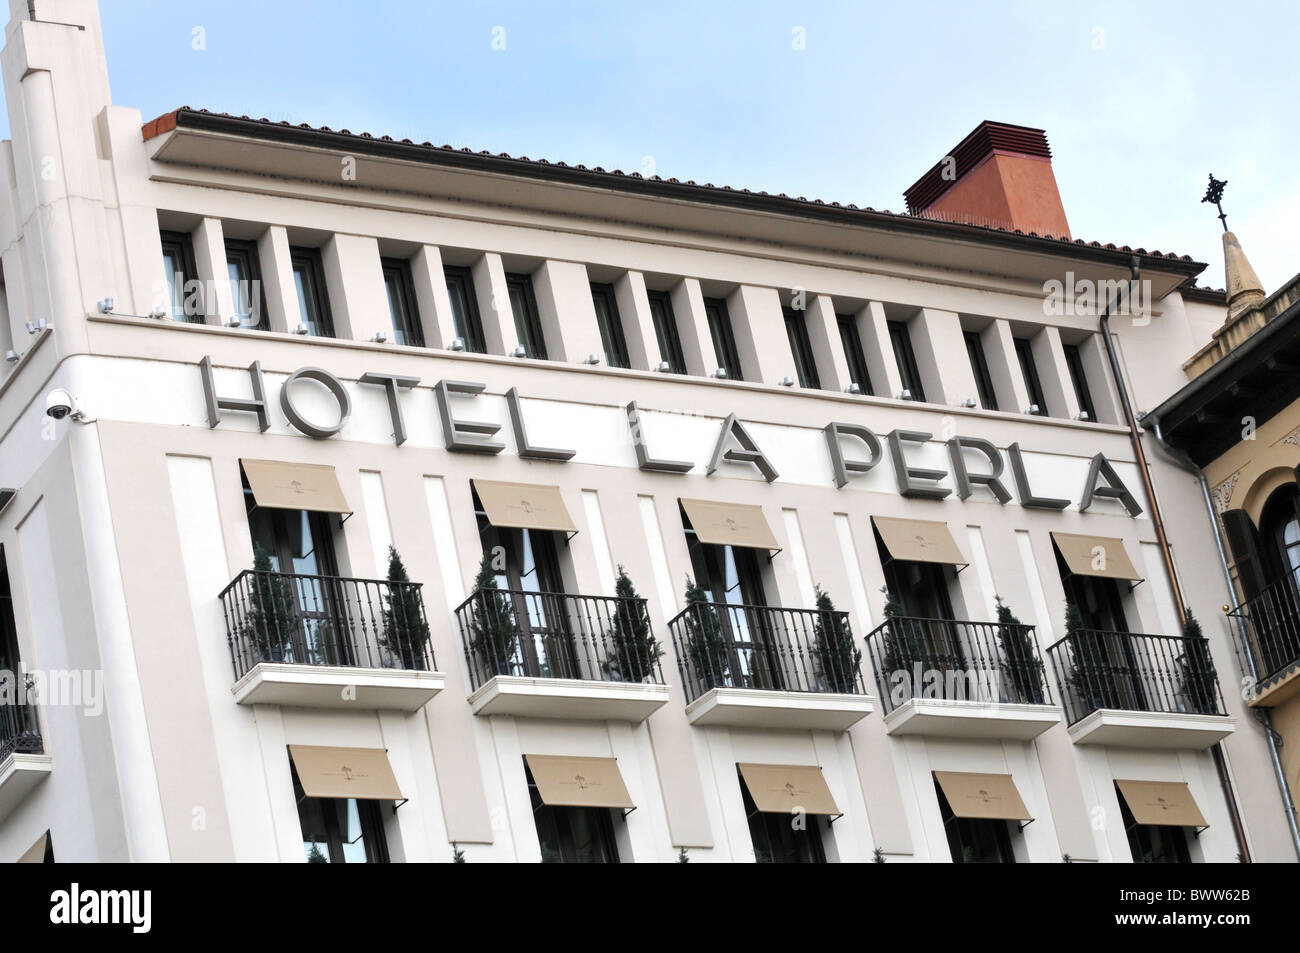 Gran Hotel High Resolution Stock Photography and Images - Alamy